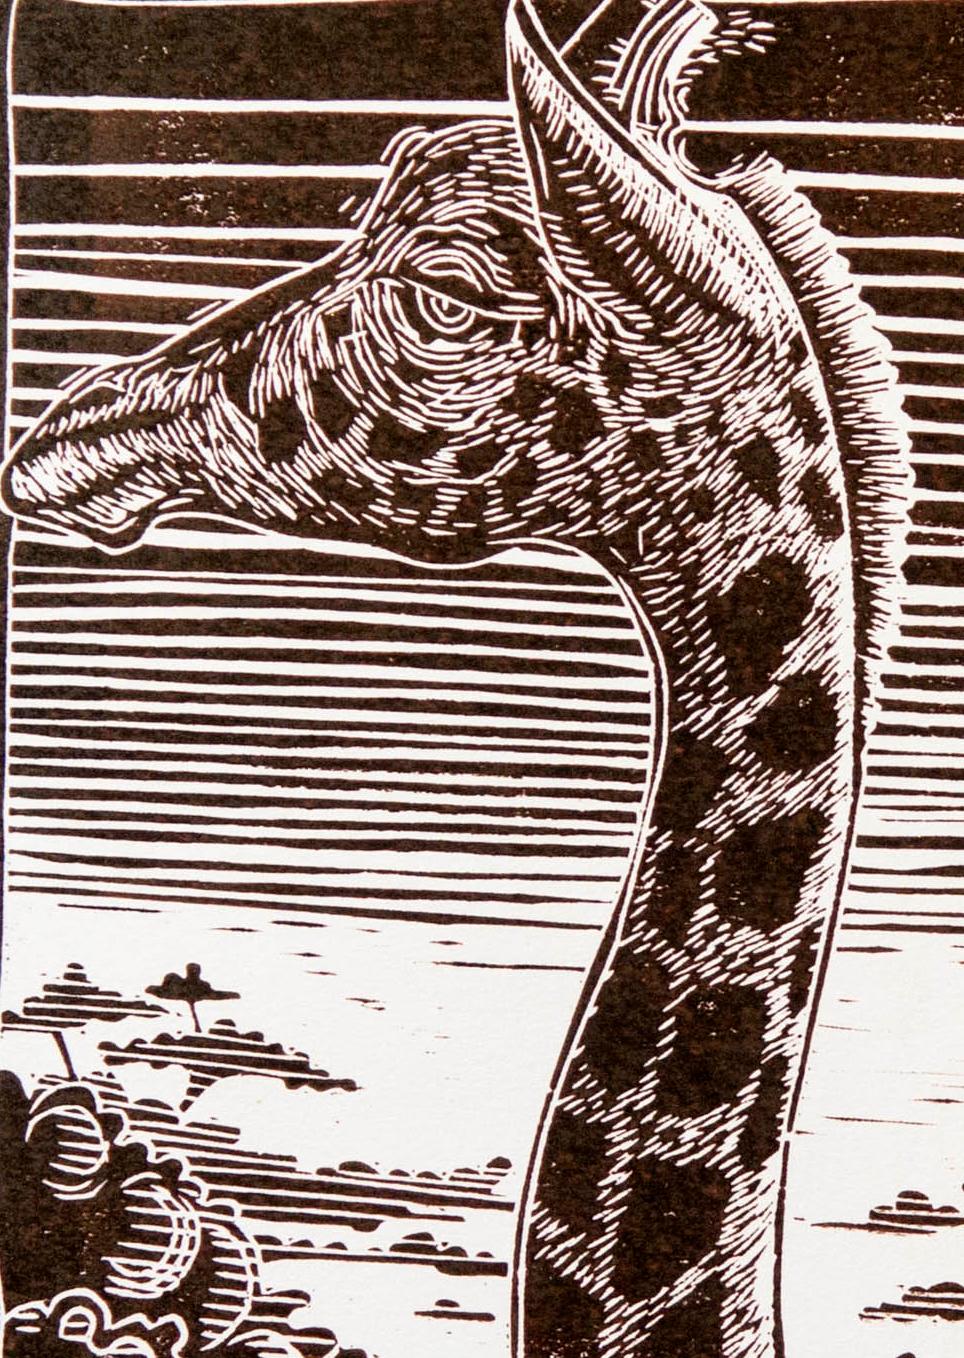 Untitled (Giraffe), 2018. Linoleum Block Print on Paper, 3/50

Petrus Amuthenu was born in Swakopmund and grew up in northern Namibia in Uukwaludhi. In 2002 a chance encounter with the late artist Samuel Mbingilo at the Katutura Community Art Centre